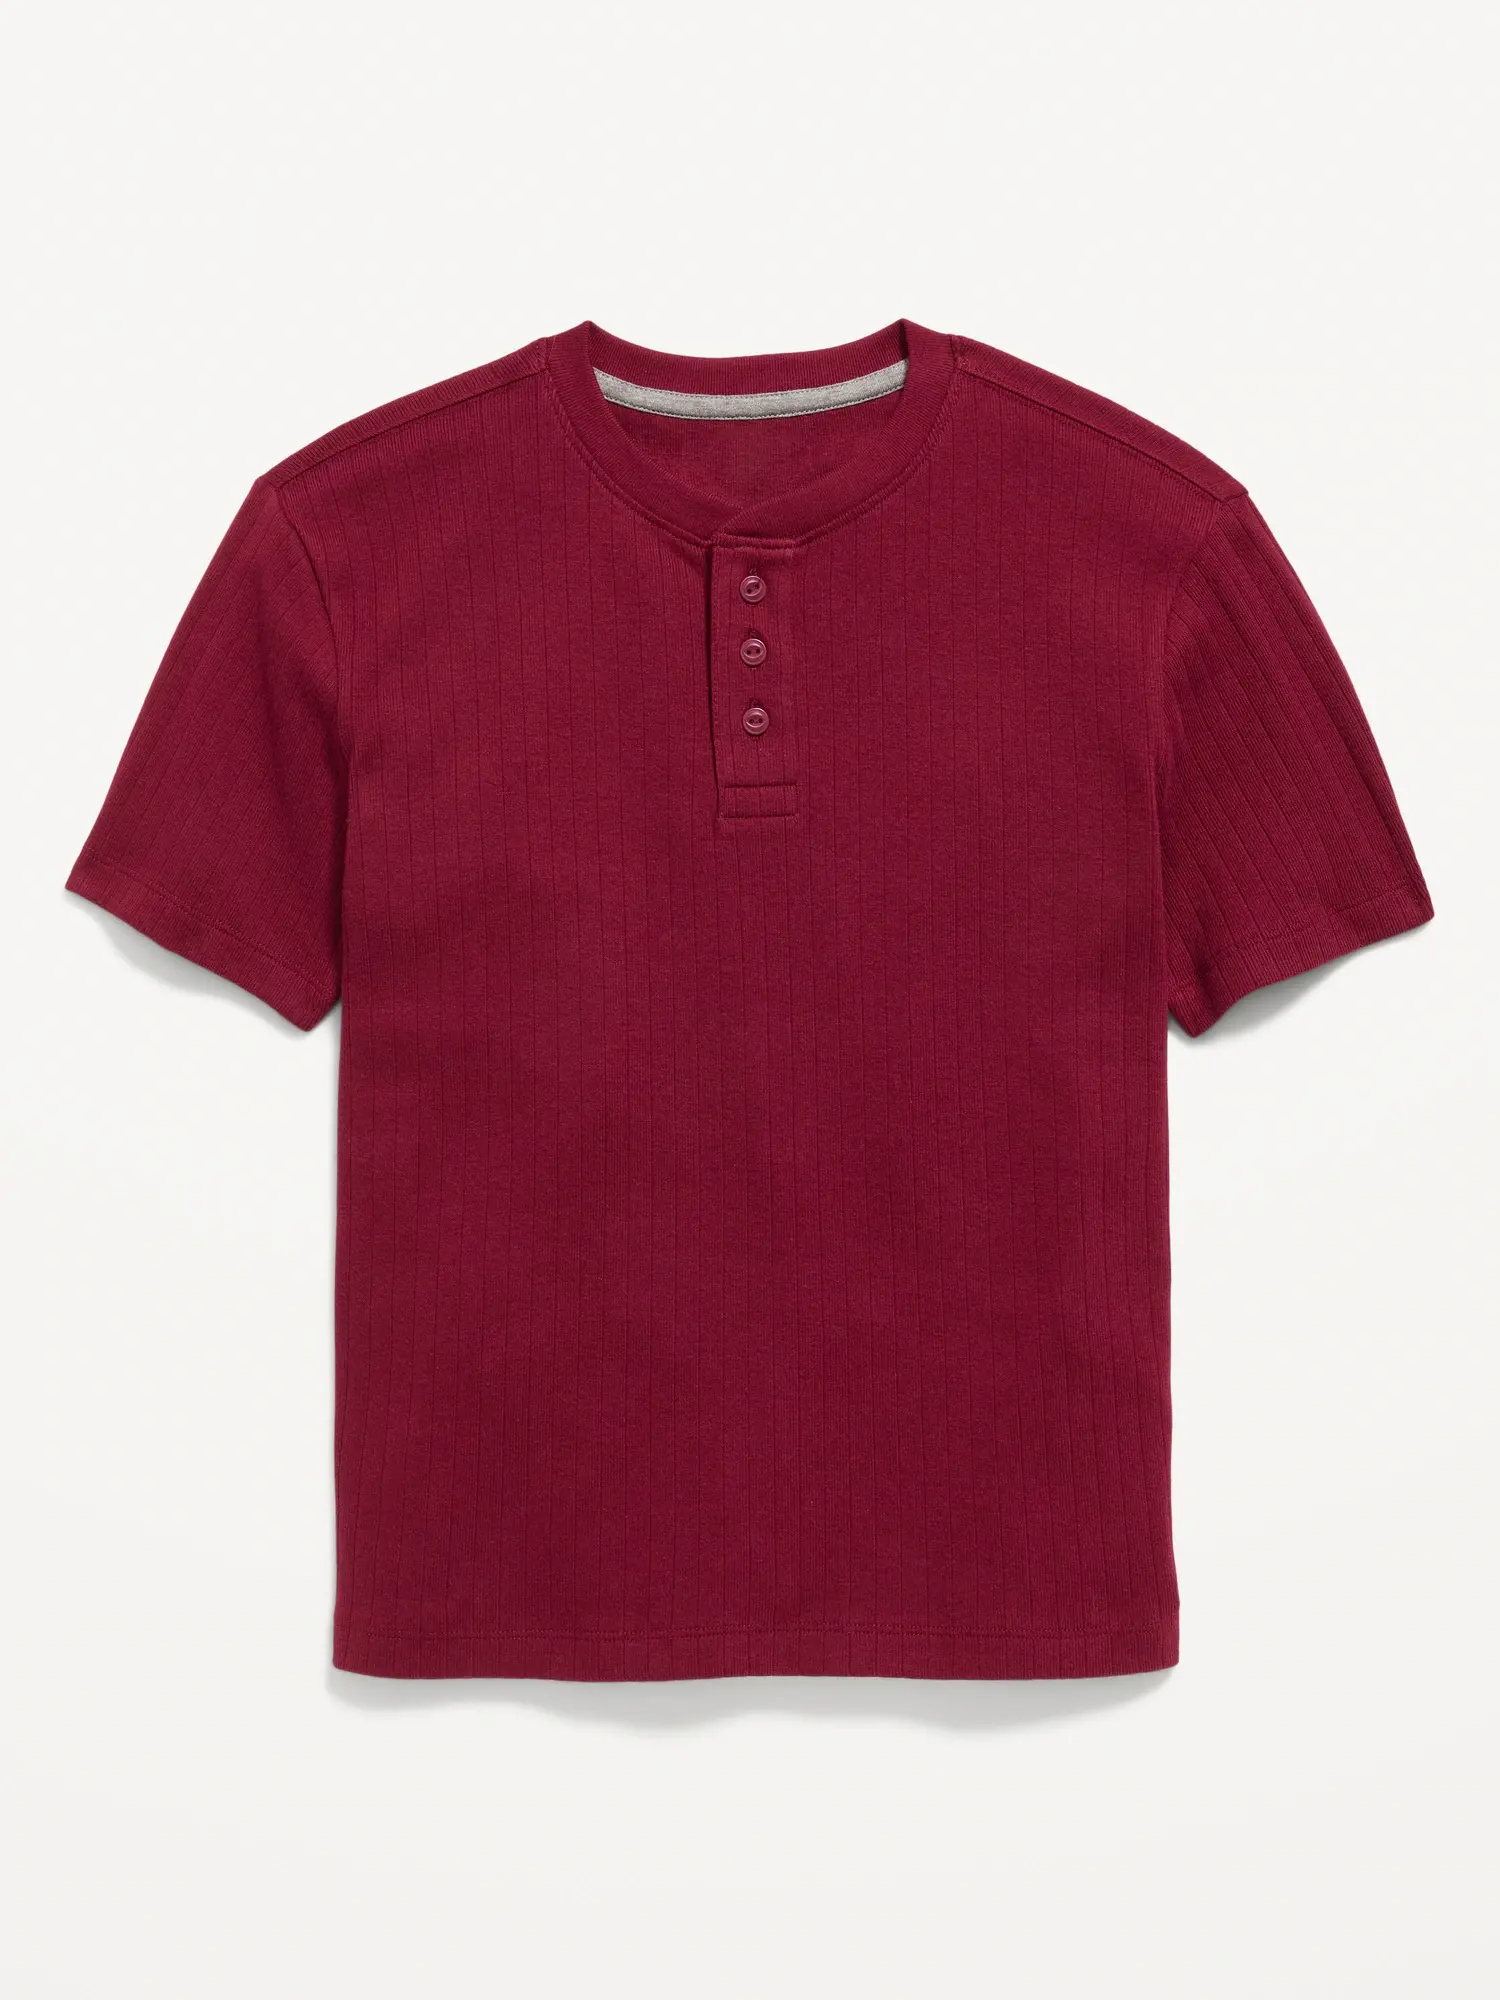 Old Navy Short-Sleeve Rib-Knit Henley T-Shirt for Boys red. 1